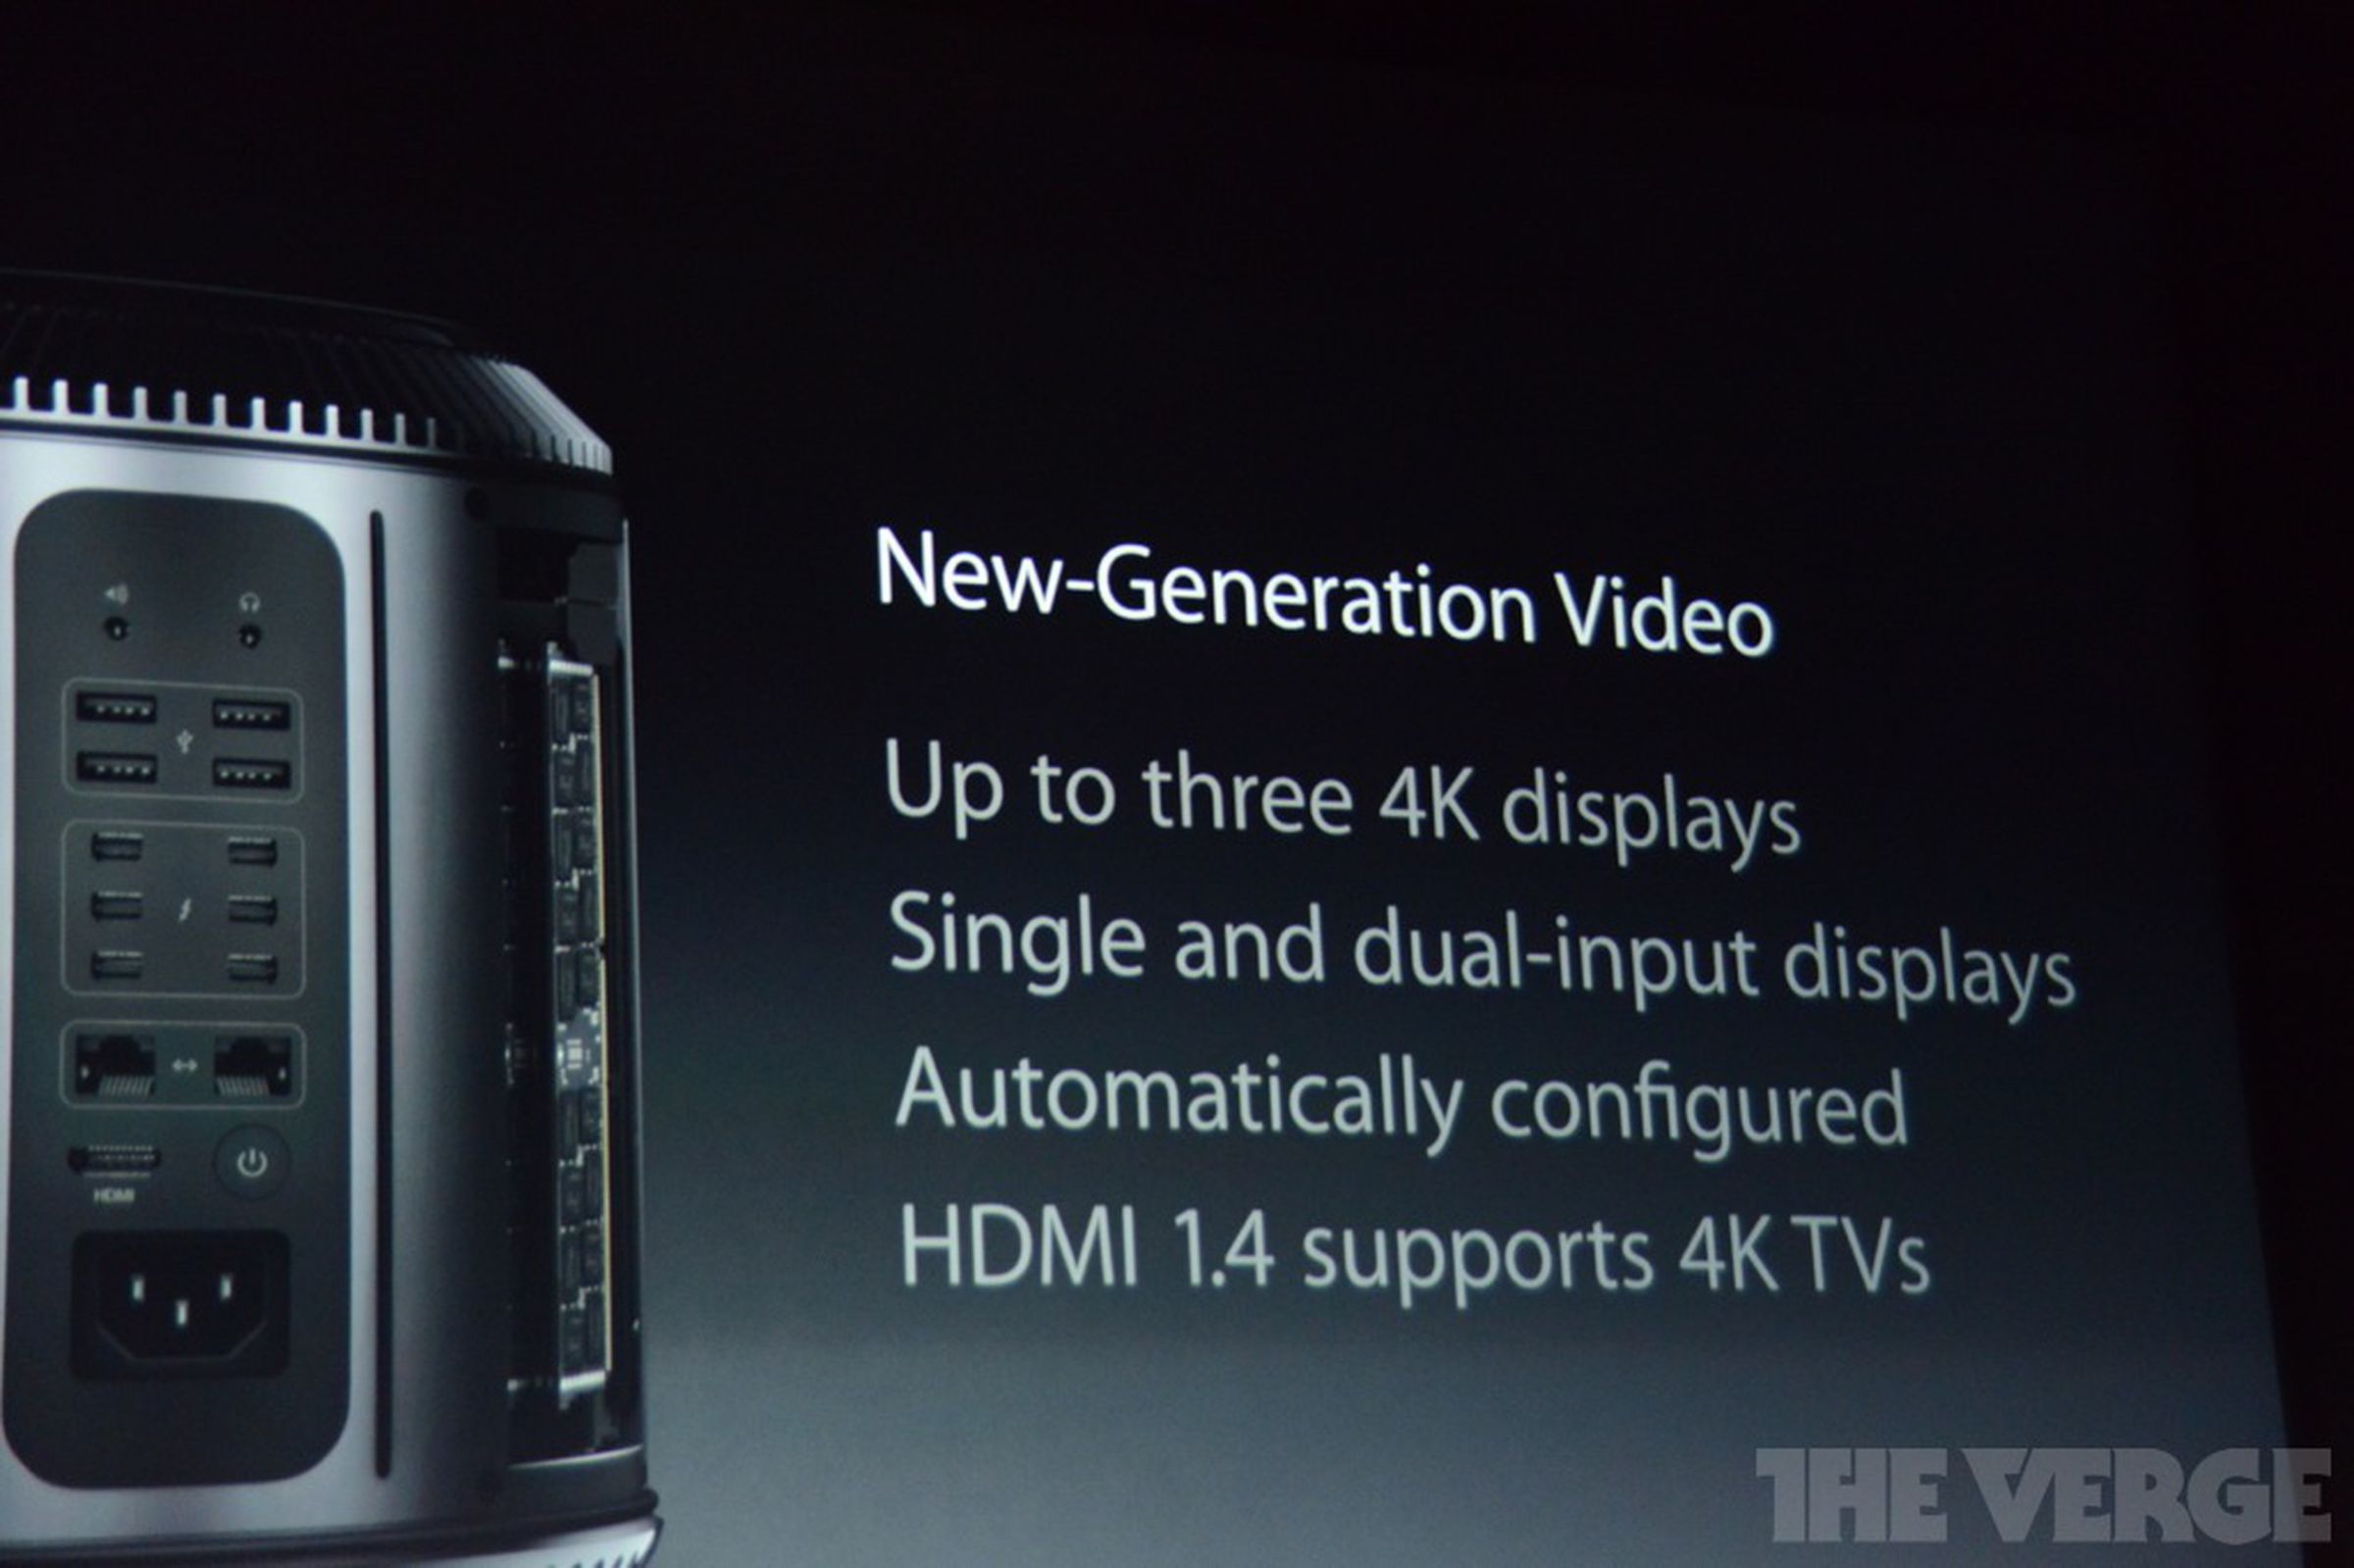 Photos of the new Mac Pro from Apple's 2013 fall event